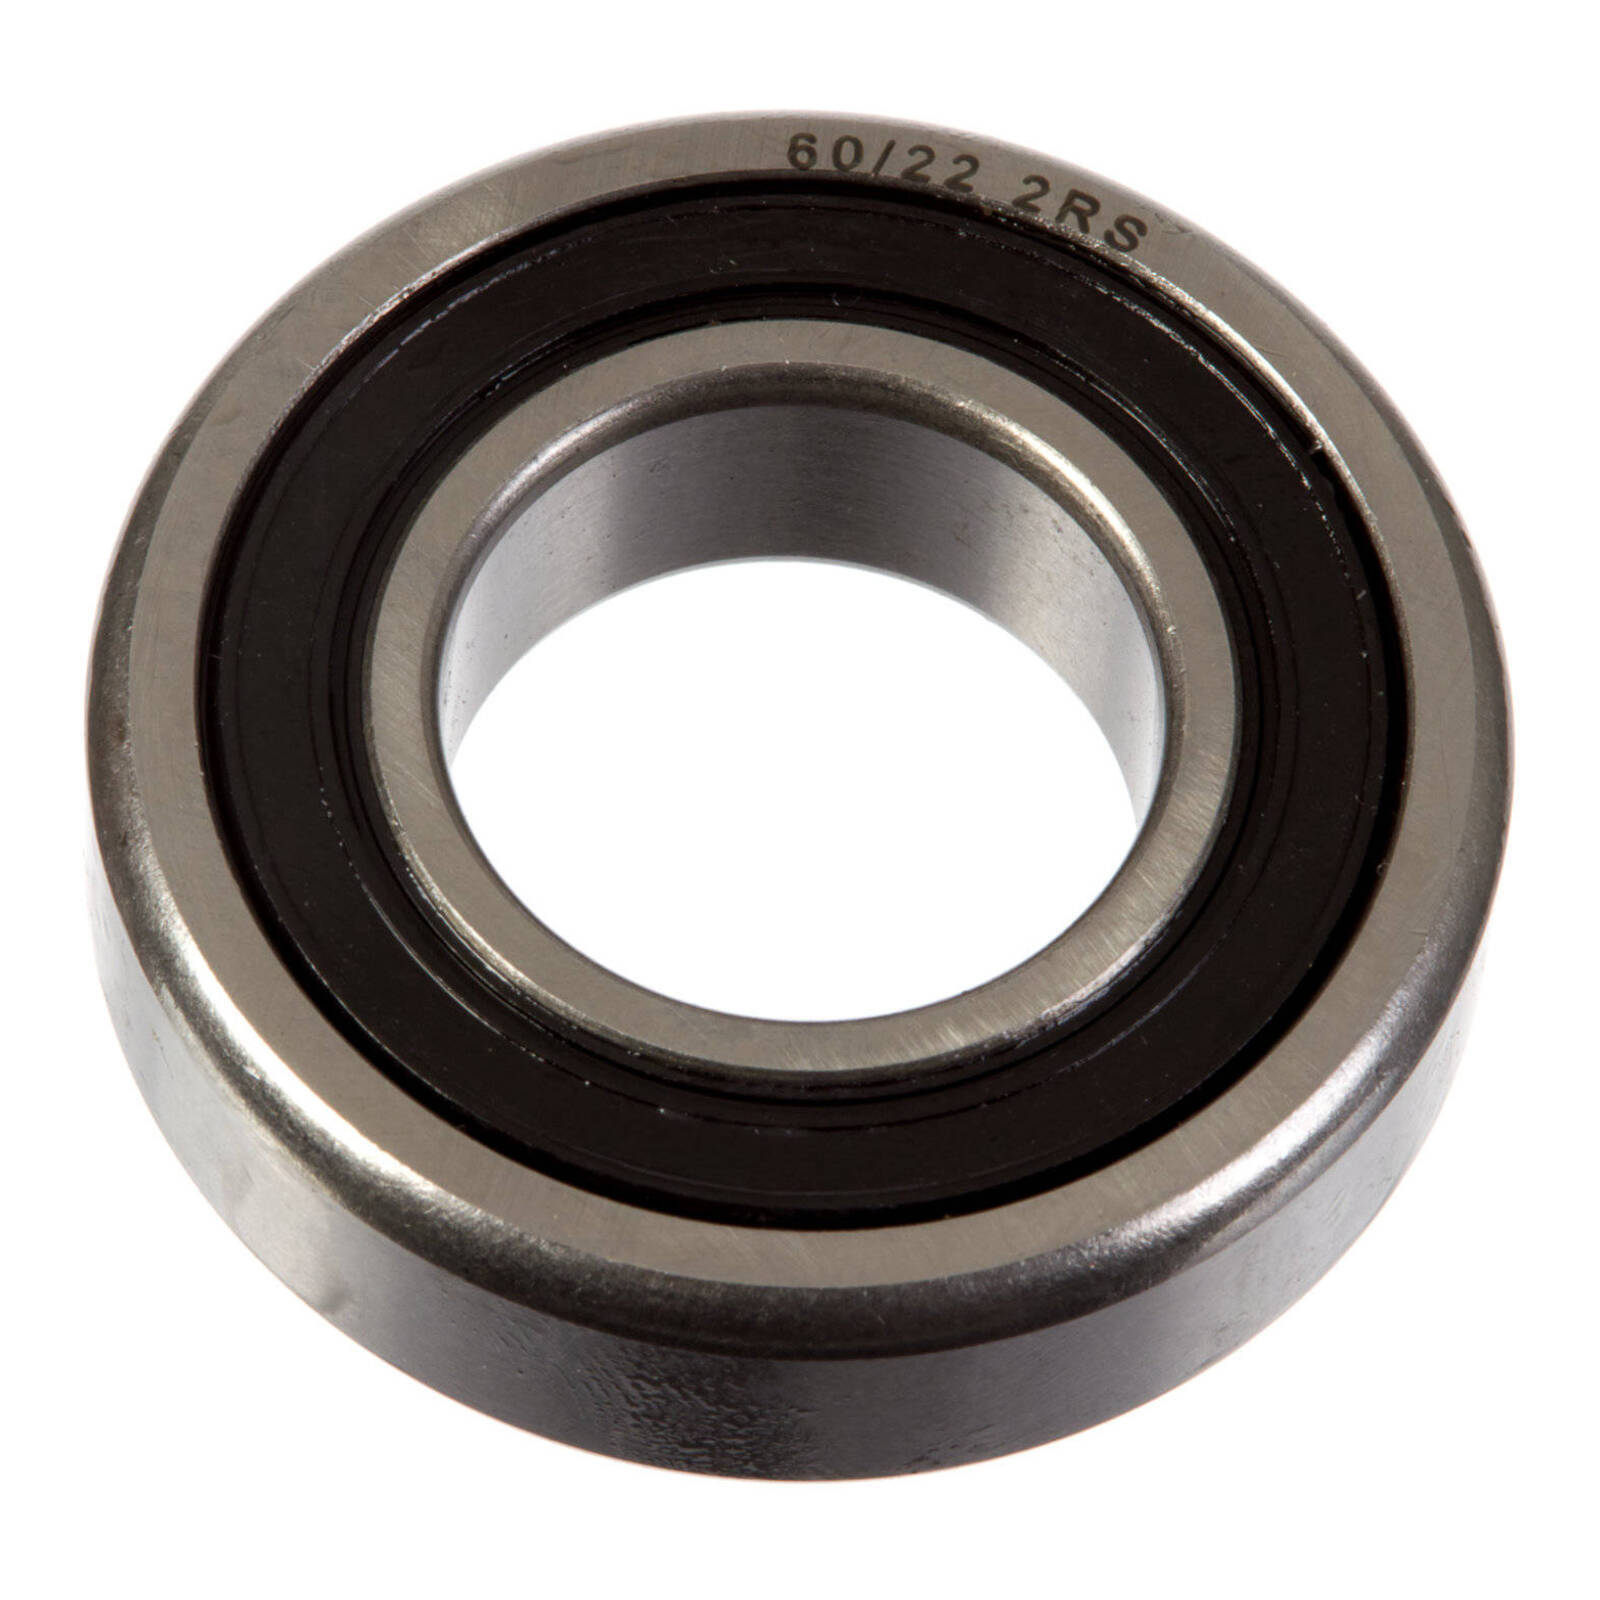 BEARING 60/22-2RS 1 PCE/EACH